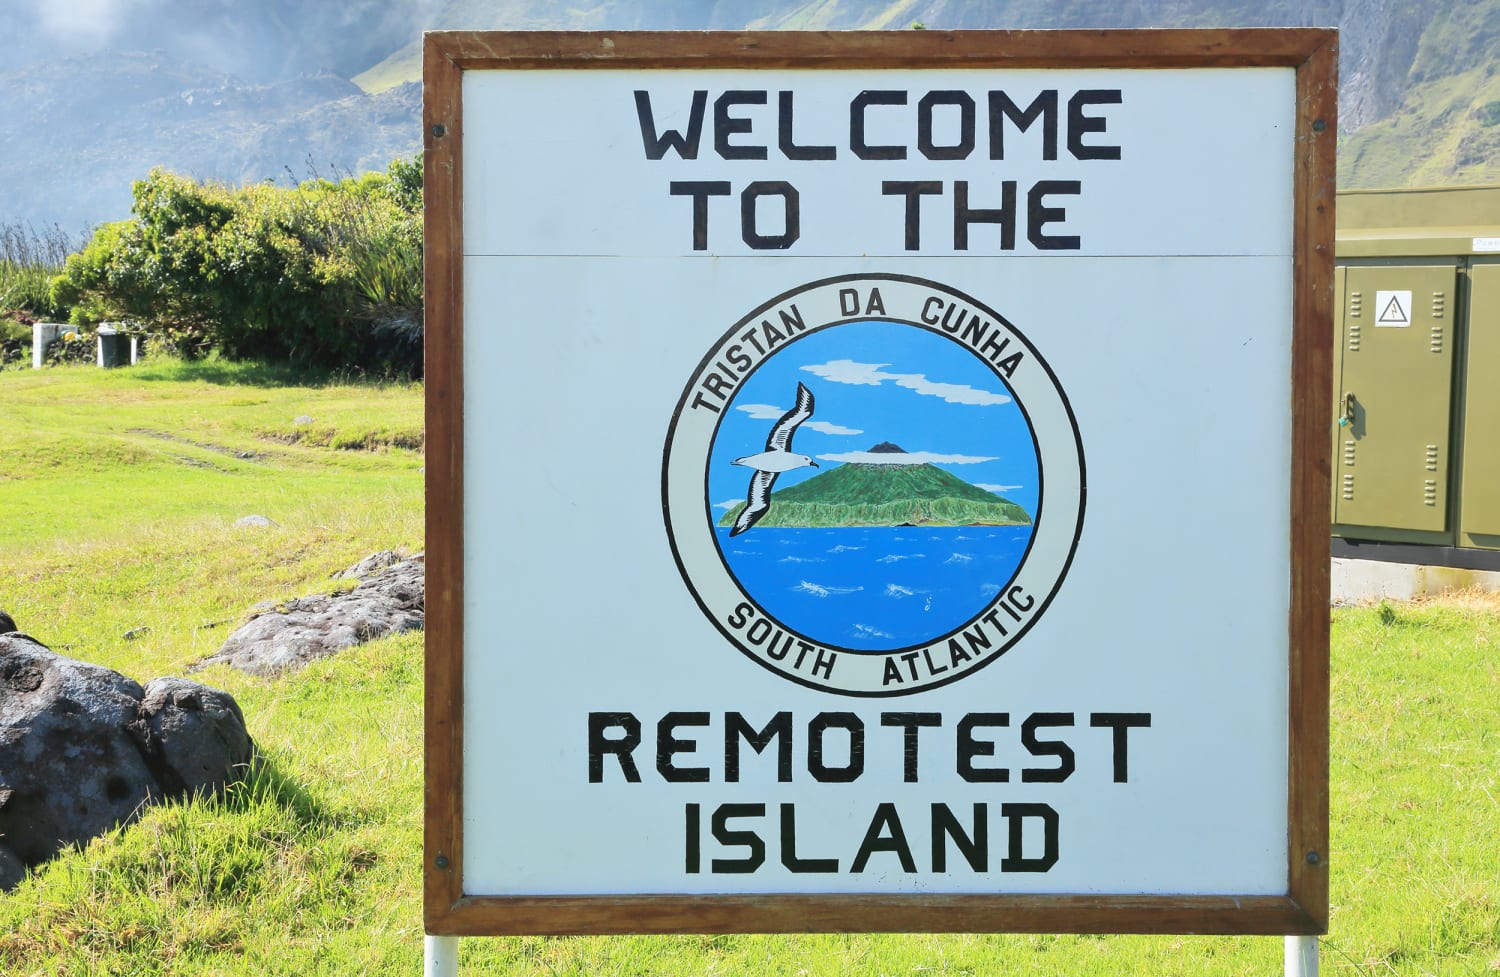 10 of the Most Remote Islands You Can Visit (or Stay on) Around the World